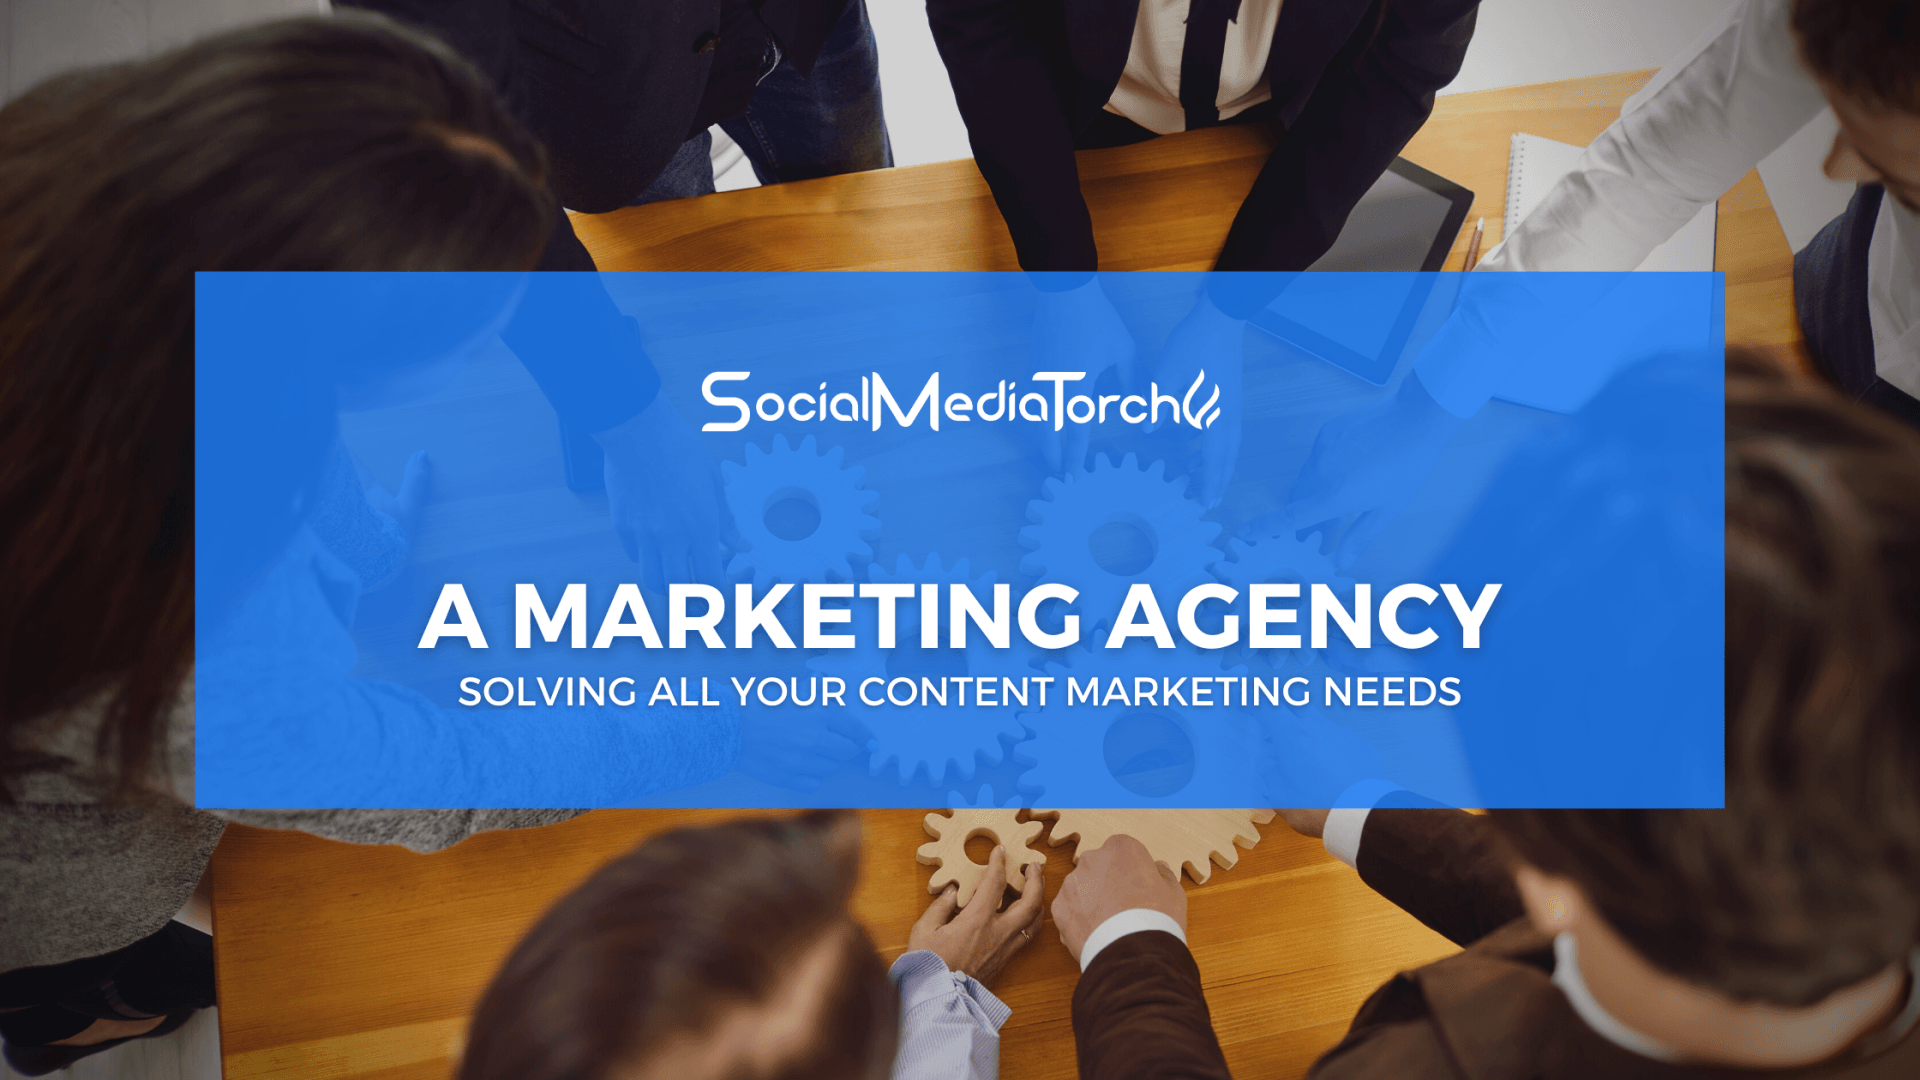 Social Media Torch: A Marketing Agency Solving All Your Content Marketing Needs